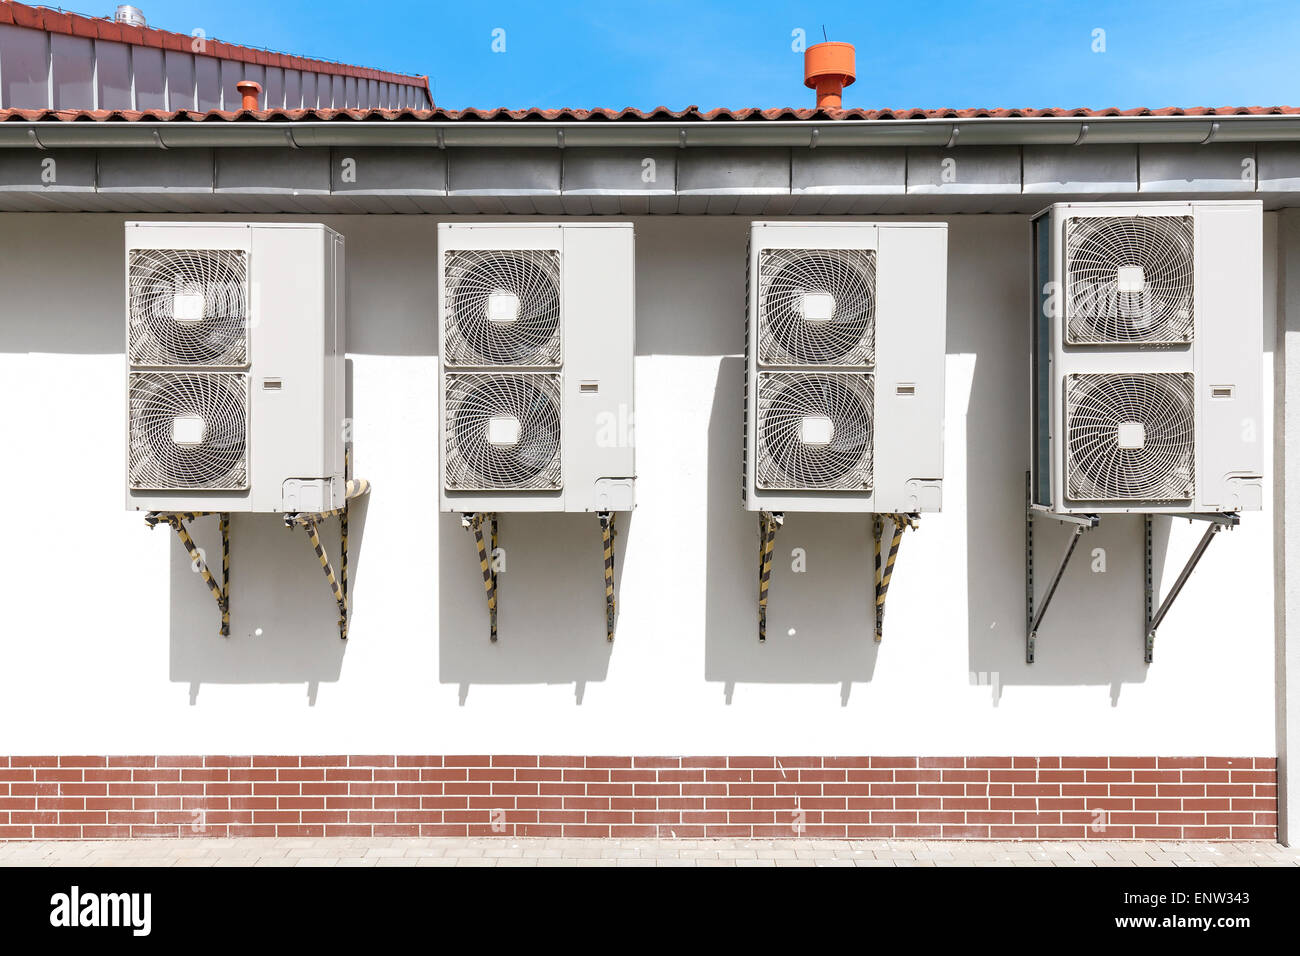 Air conditioning system assembled on a wall of a building. Stock Photo